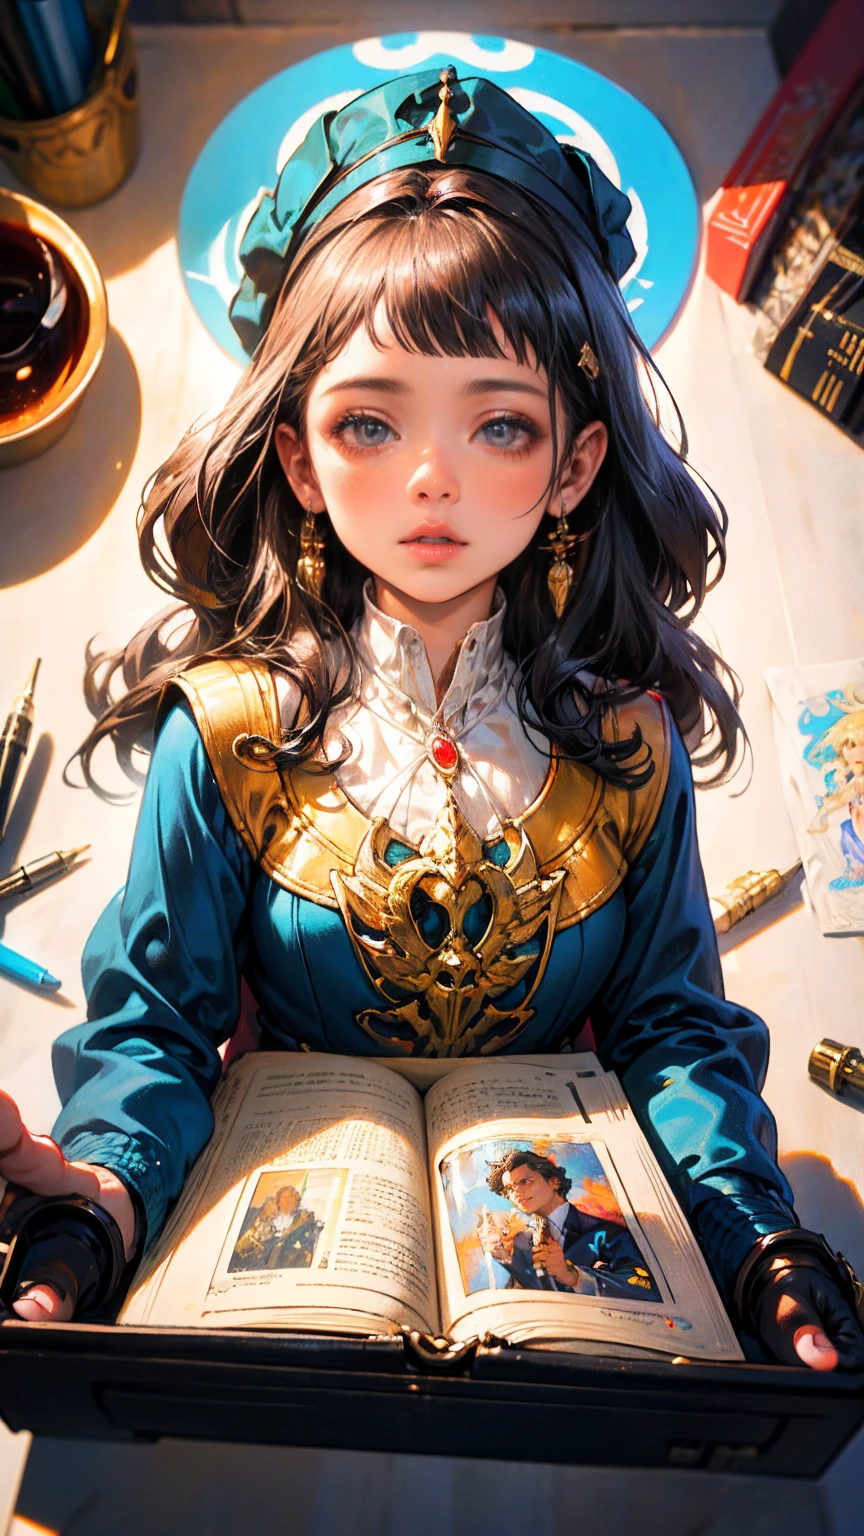 diy13，Highest quality, ultra-high definition, masterpieces, 8k, realistic, anime styled, 3d render，a close up of a person writing a book , jc leyendecker and sachin teng, james jean and wlop, james jean and peter mohrbacher, alphonse mucha and rossdraws, sachin teng, james jean marc simonetti, artgerm and james jean, in the art style of mohrbacher